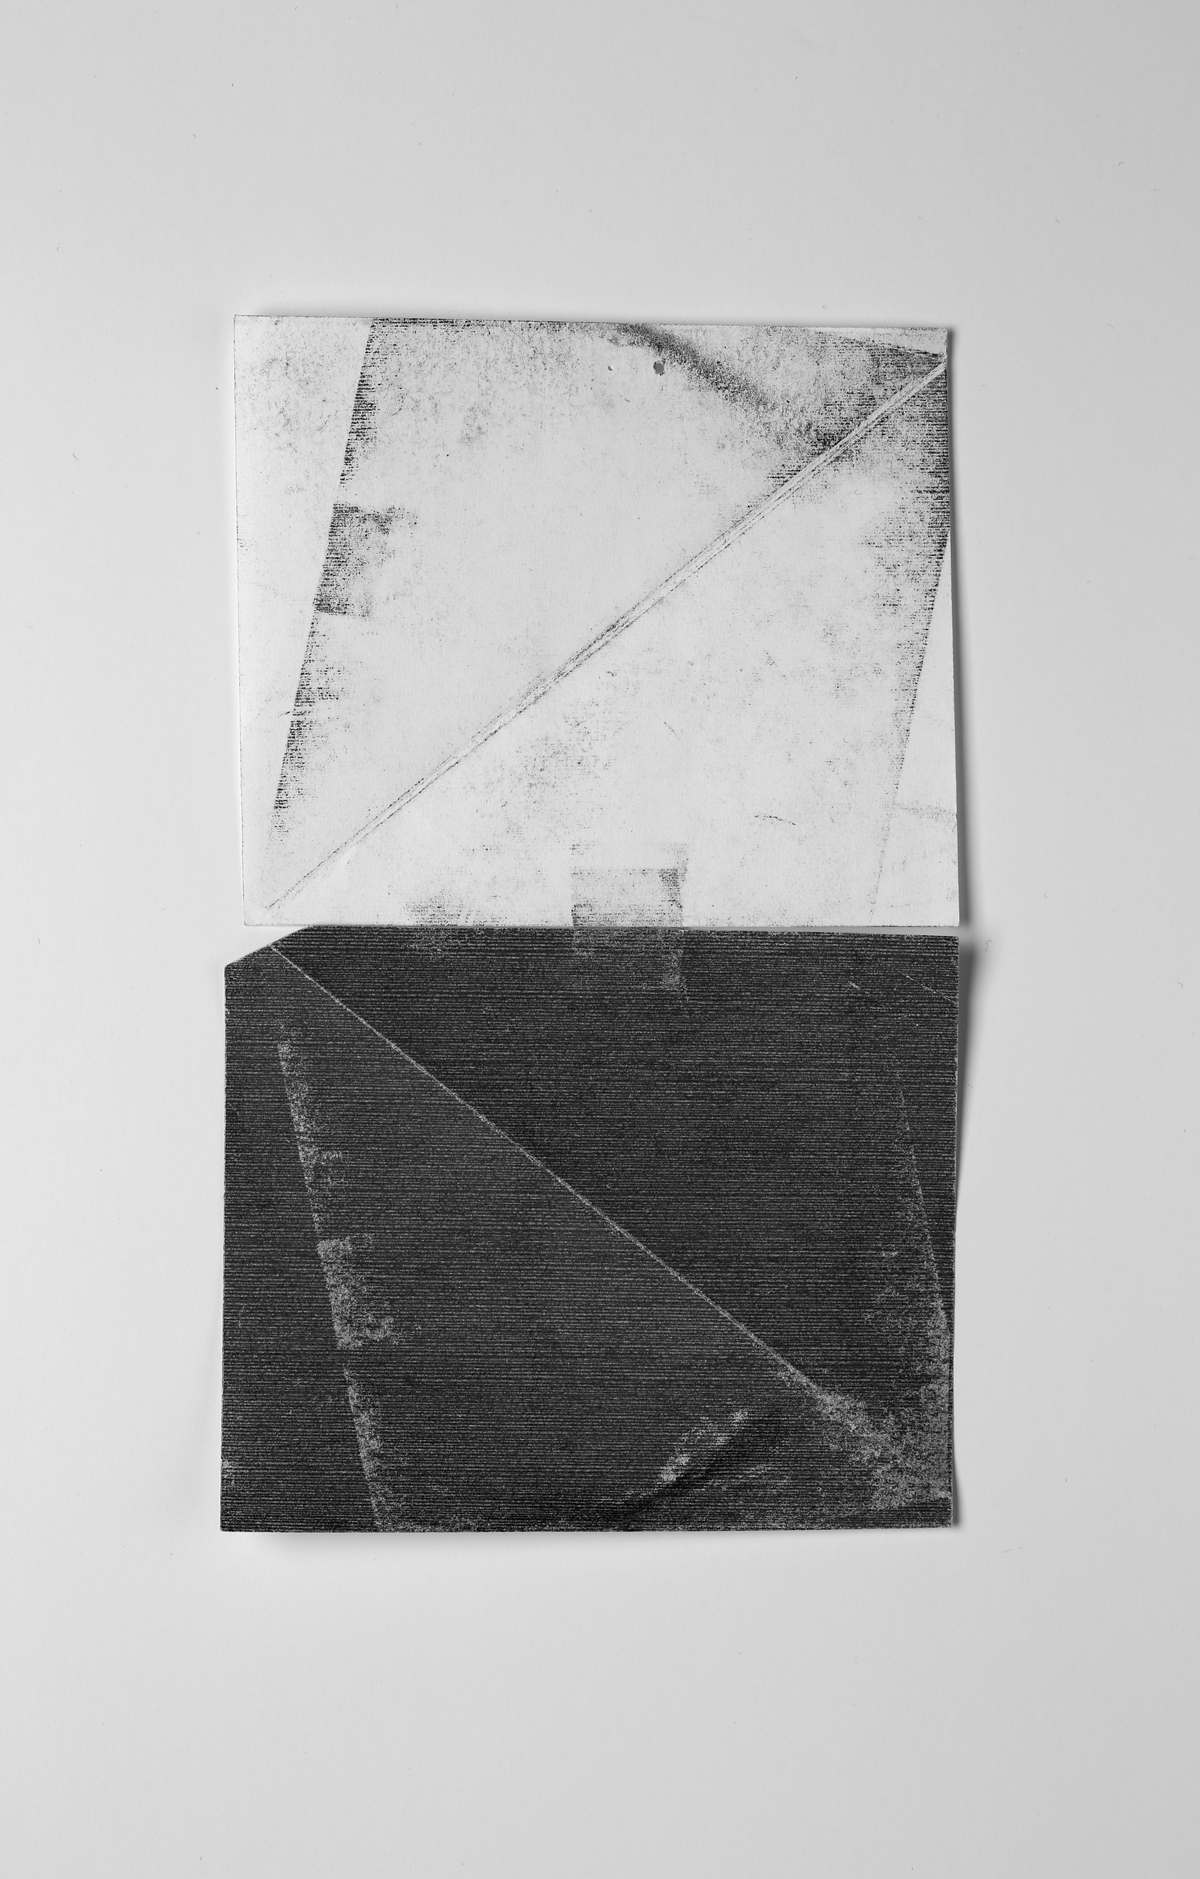   Untitled (test, from the ongoing series, Divided/Defined, Weights Measures and Emotional Geometry)   2013, pressed and folded transfer paper taped to regular bond paper, 11.5 x 9 inches 